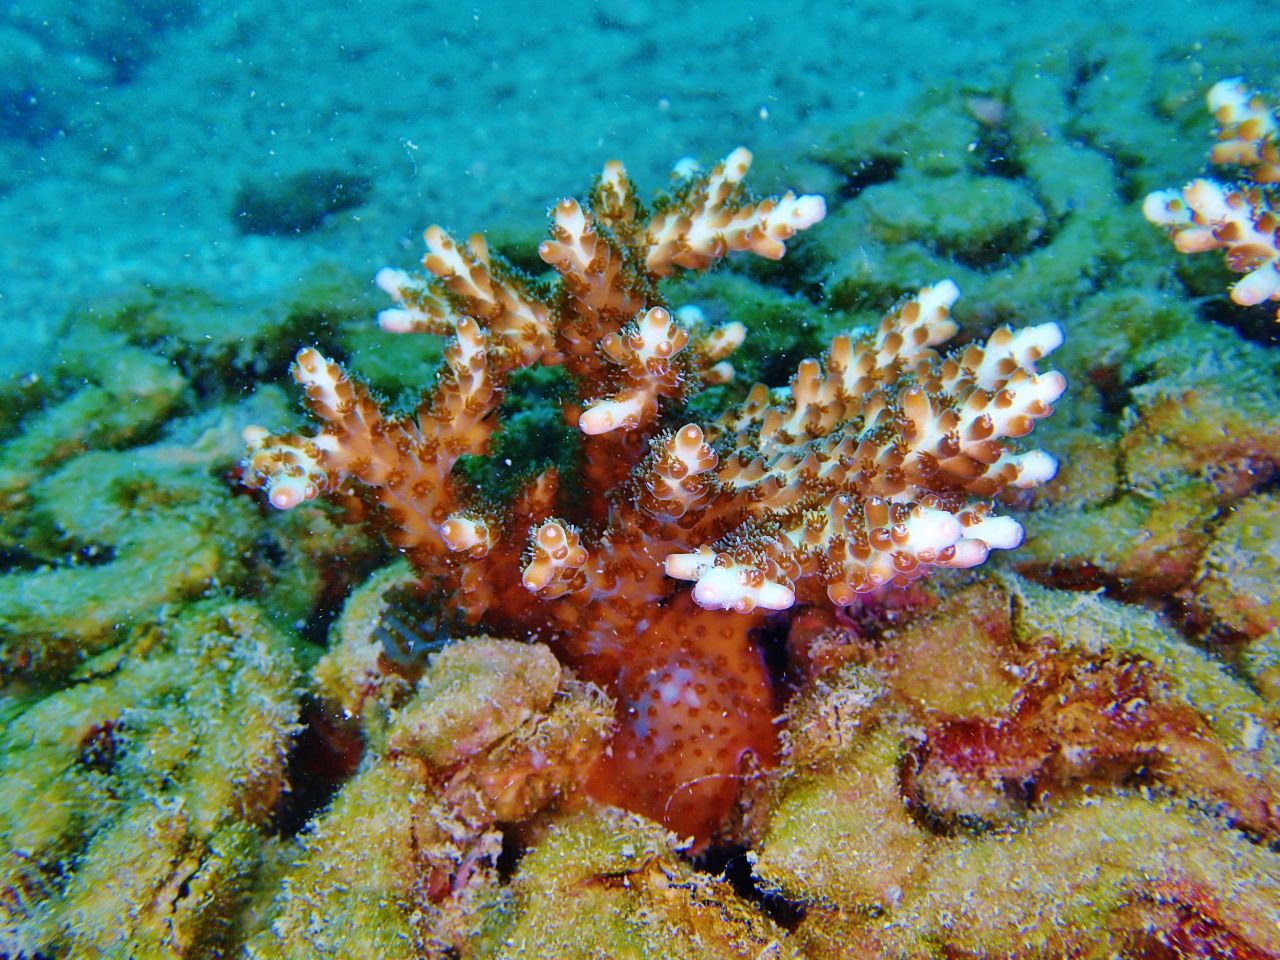 Often mistaken for rocks or plants, corals are actually invertebrate animals. Found in tropical and subtropical waters, from the Caribbean to Hong Kong (pictured), these creatures are under threat from climate change.<strong> Scroll through to learn more about corals and their underwater world. </strong>